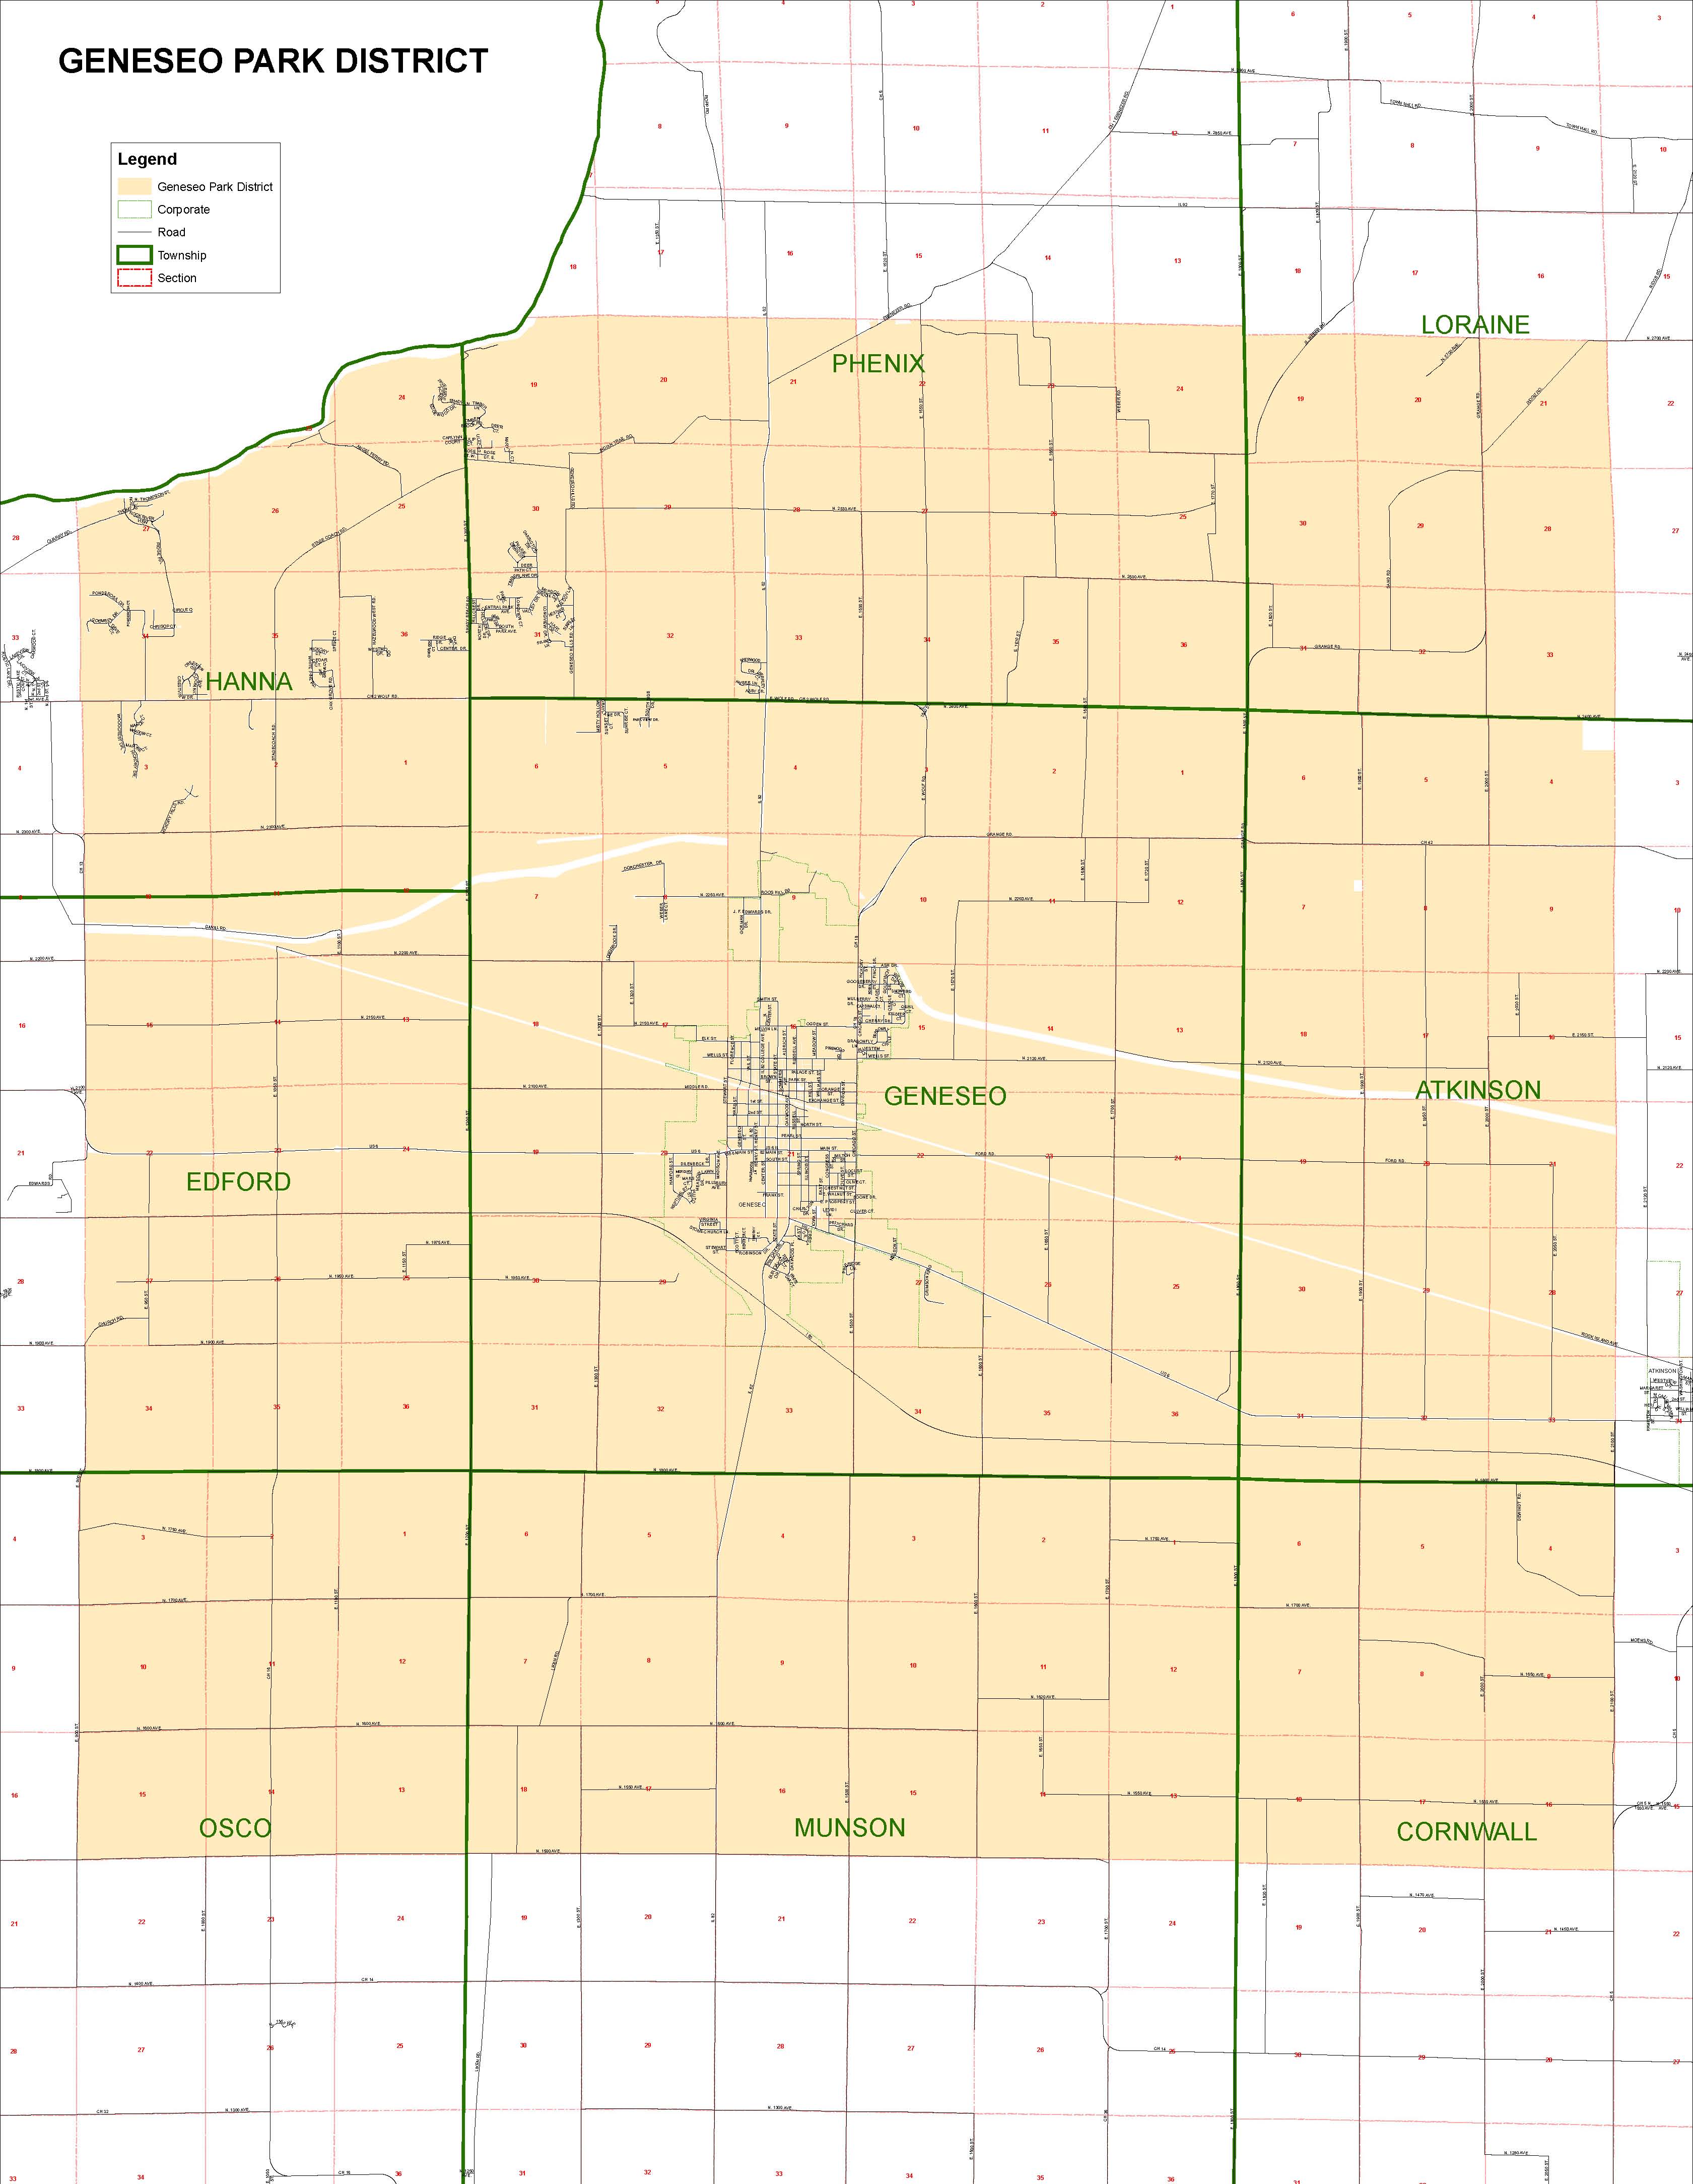 Geneseo Park District Boundary Map 2011 